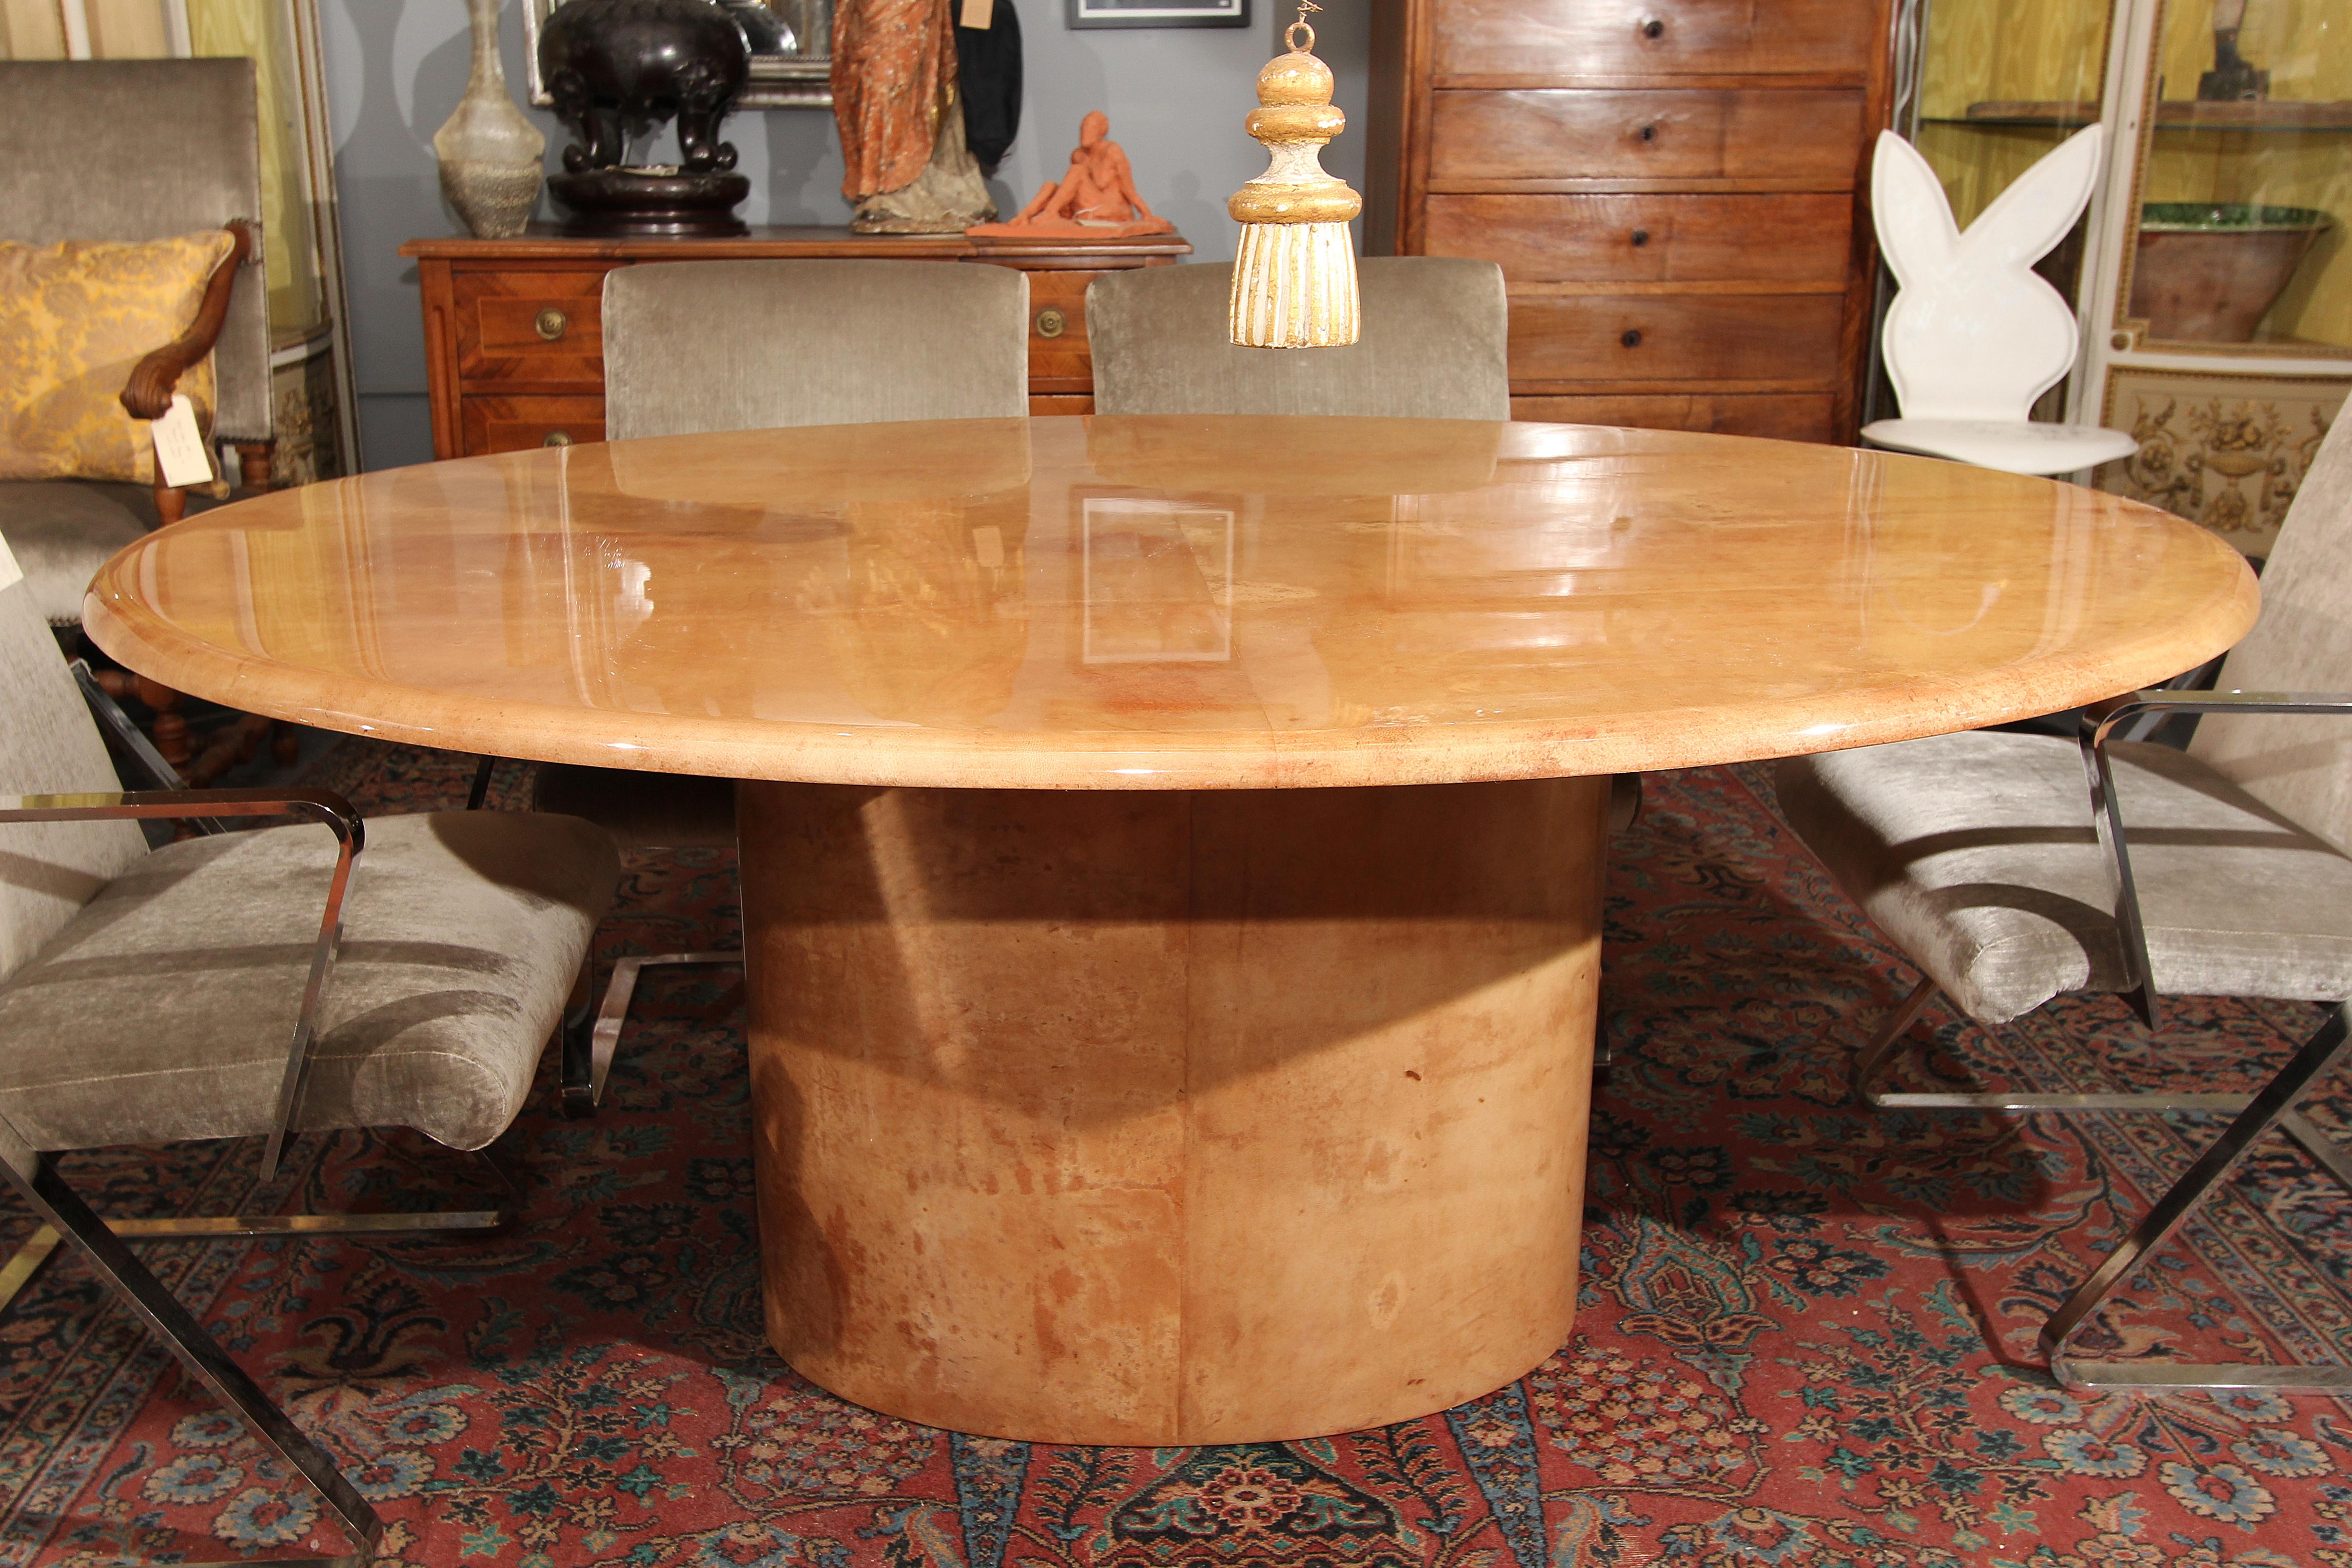 Italian lacquered goatskin oval dining table with oval pedestal base. Beautiful color and condition. Perfect desk or entry table.